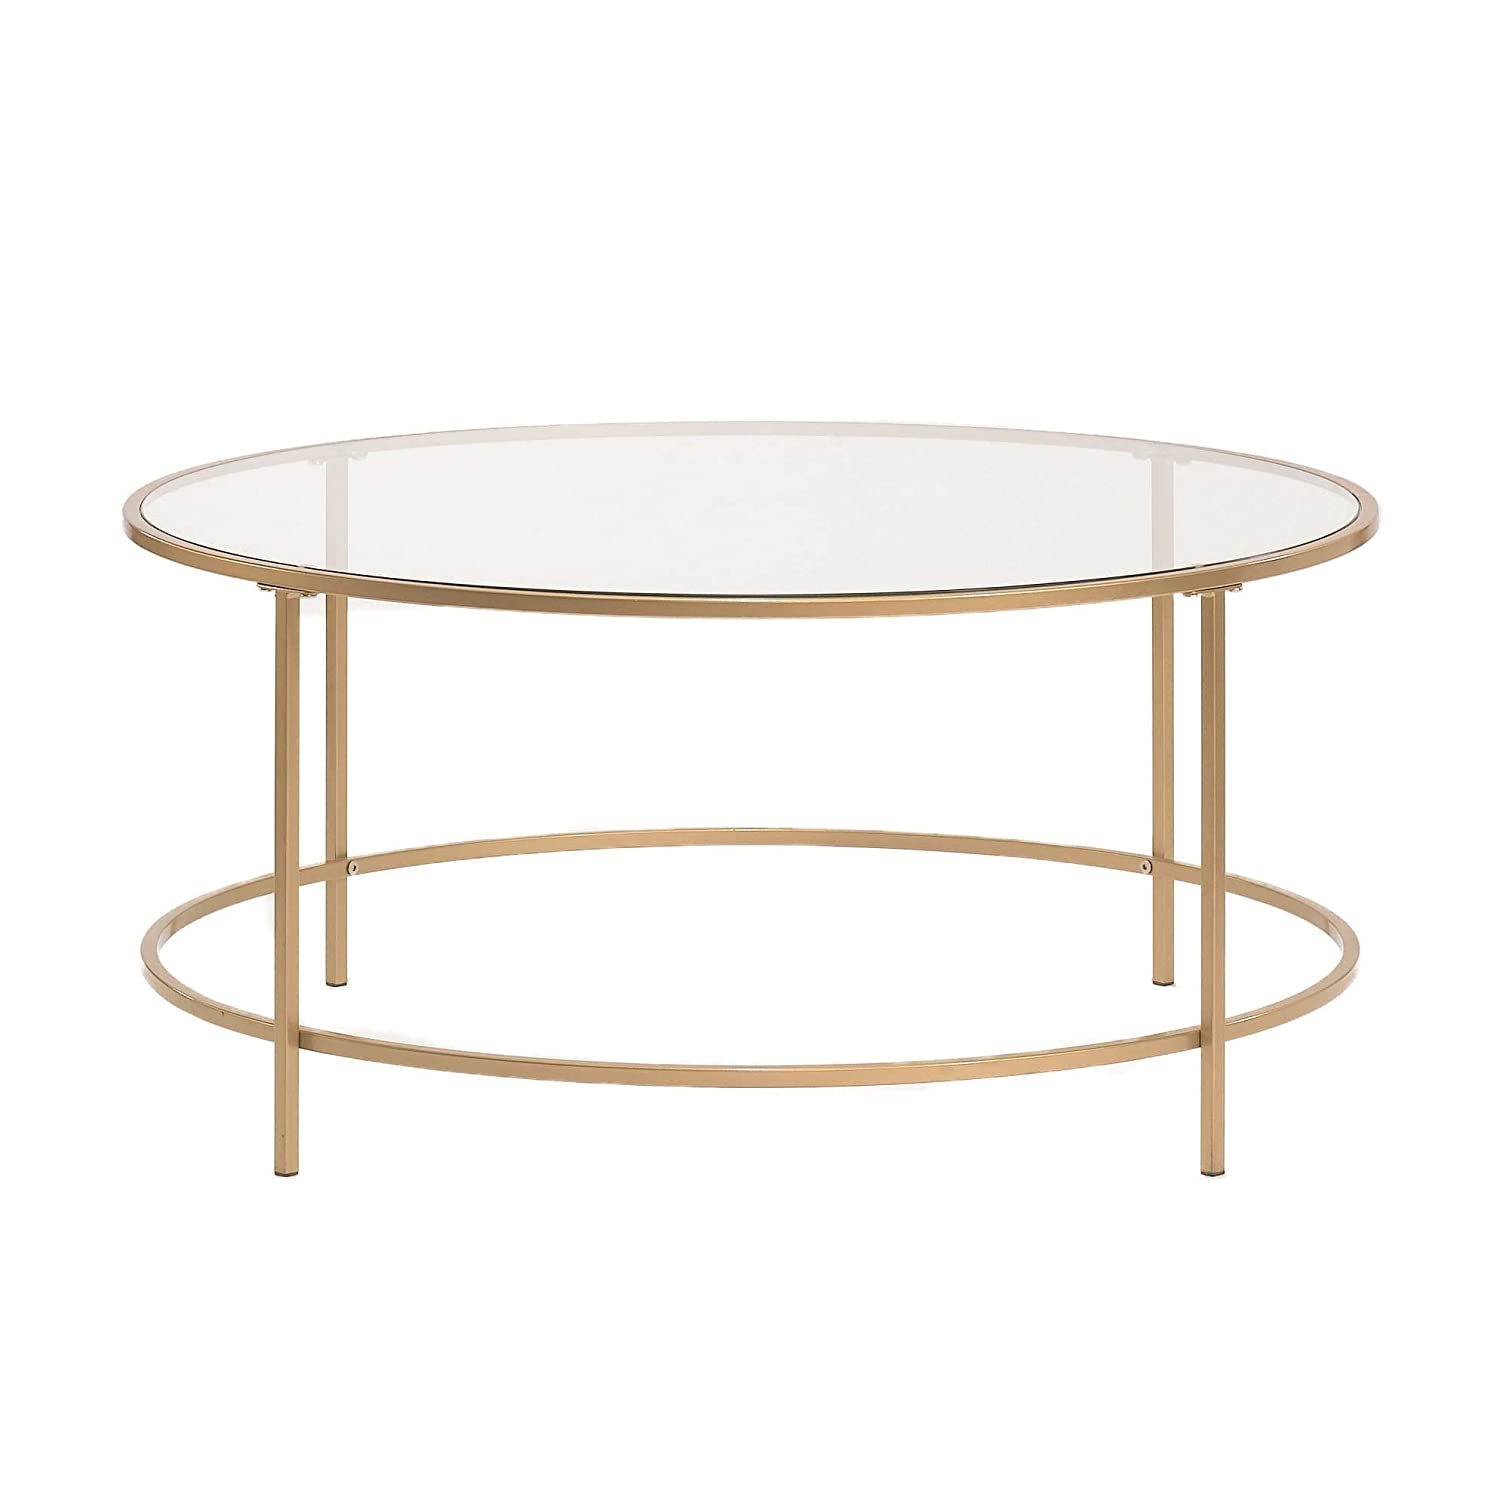 Sauder 417830 Int Lux Coffee Table Round, Glass / Gold Finish - $187.99